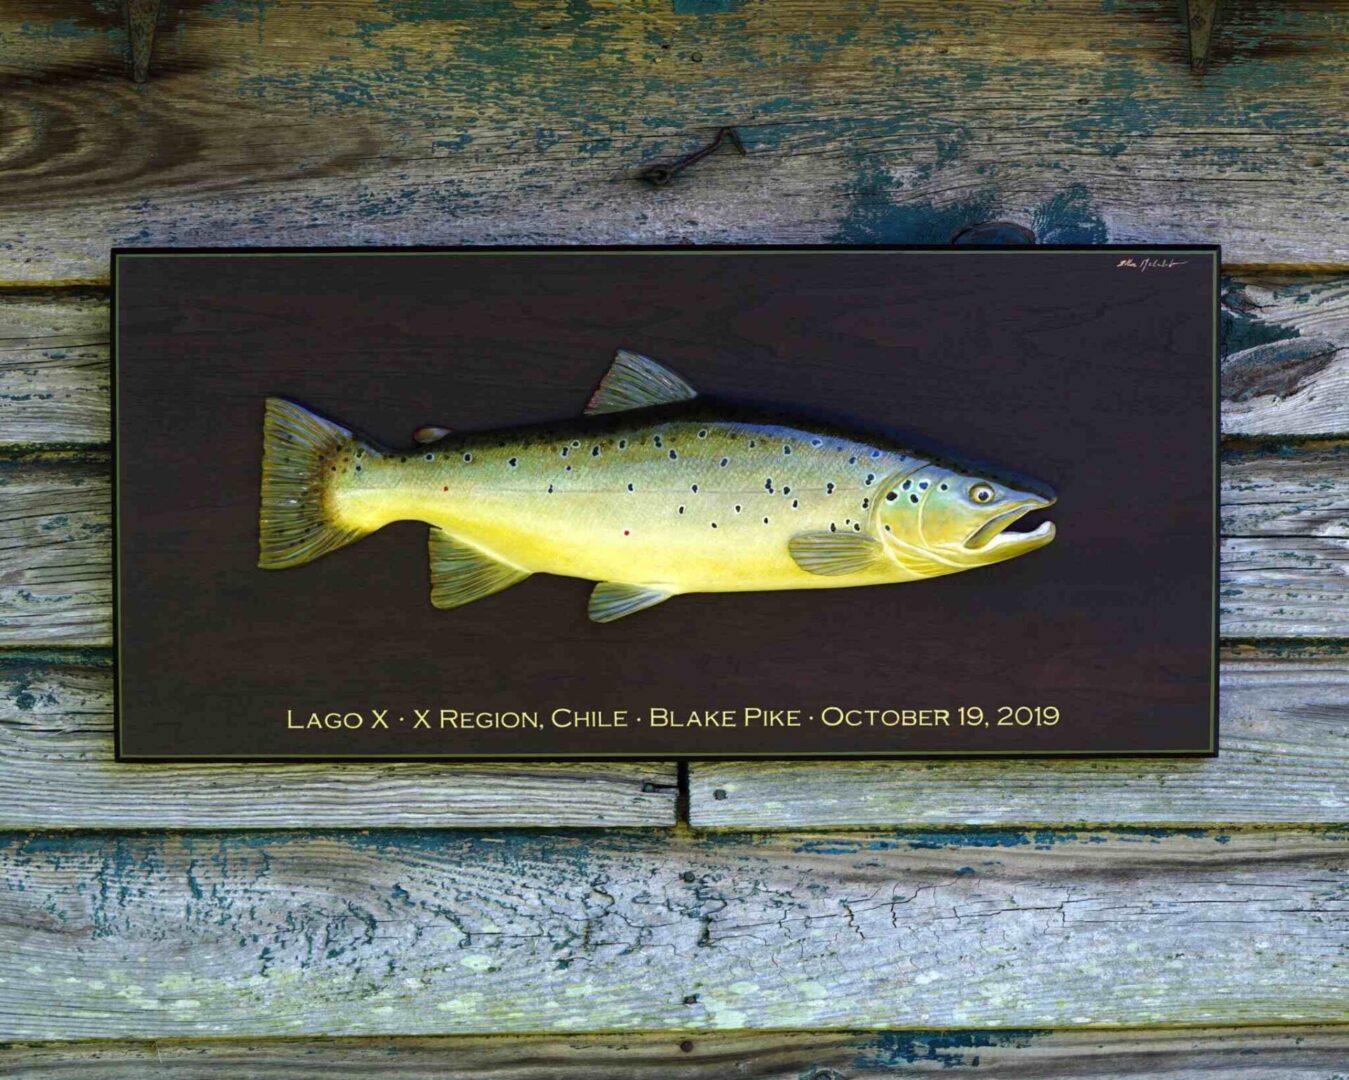 A long shot Fish carving on wooden board